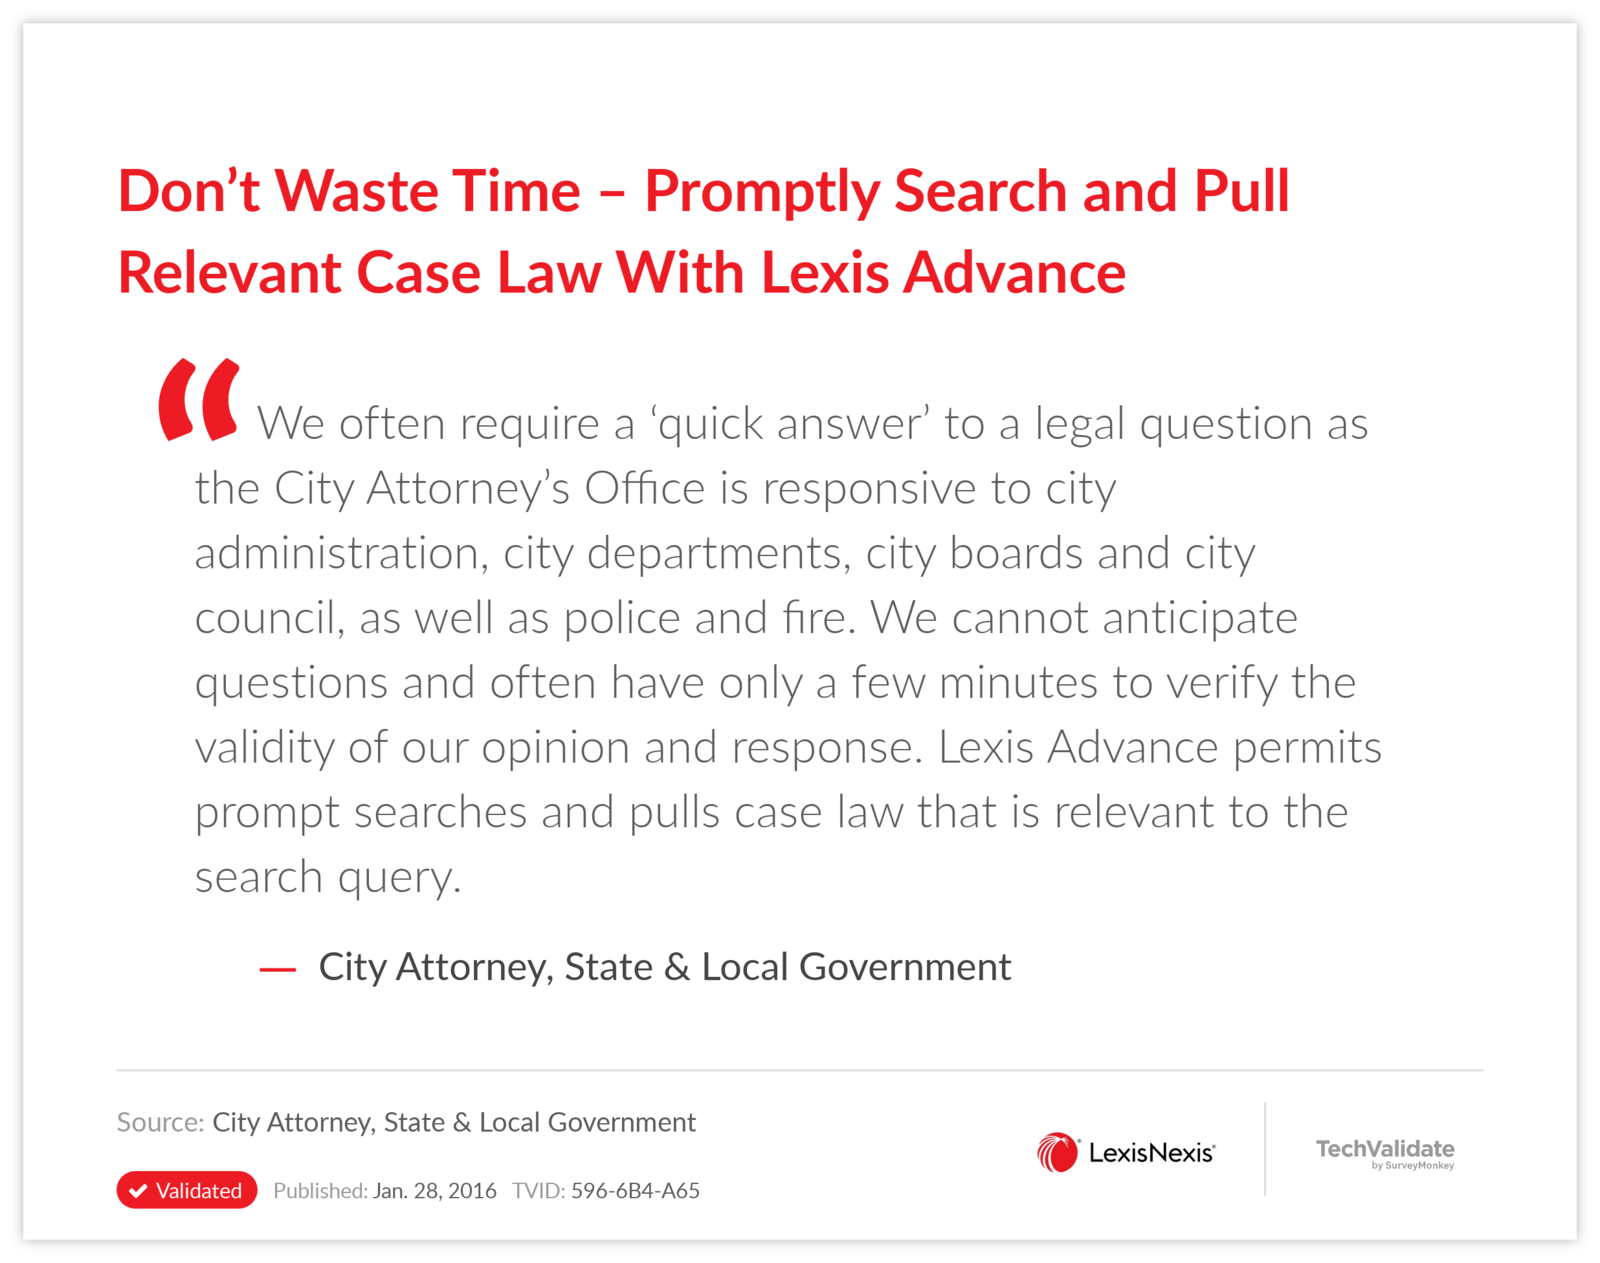 Don't Waste Time-Promptly Search and Pull Relevant Case Law With Lexis Advance